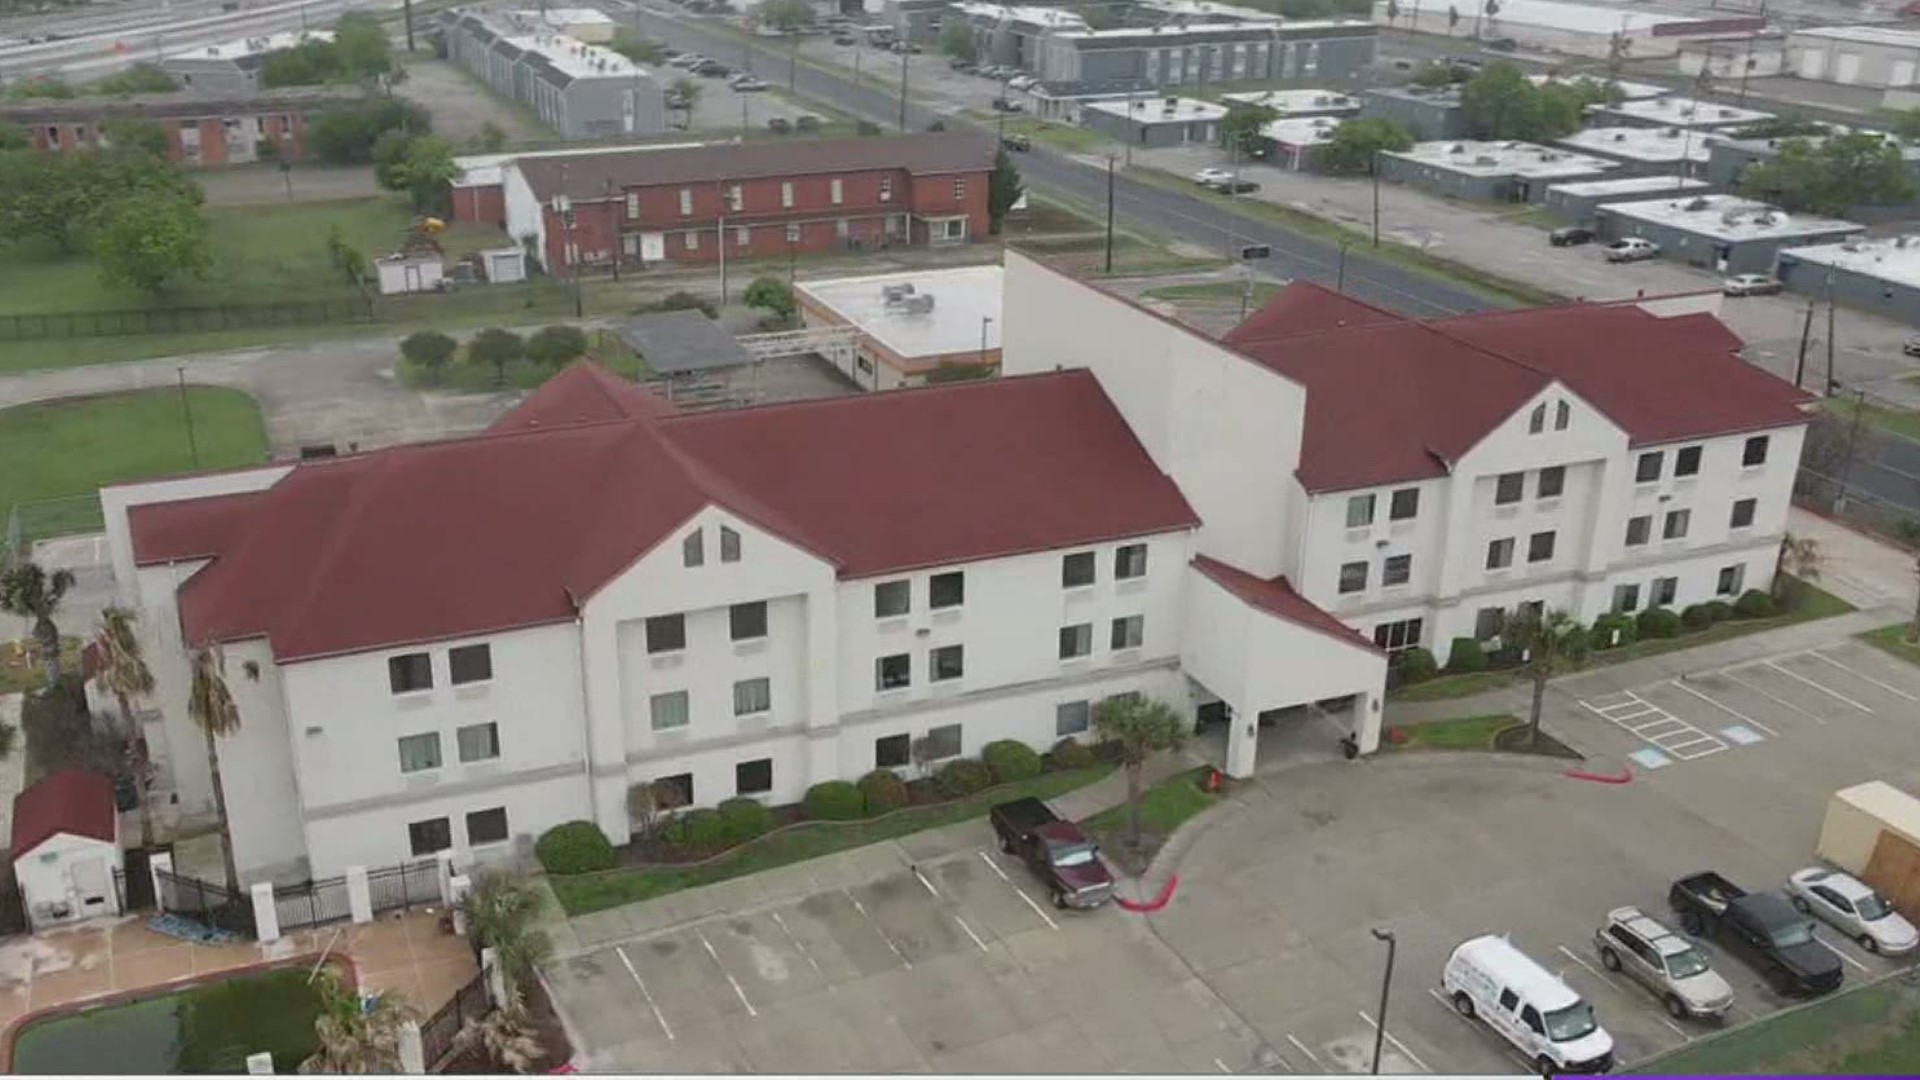 The Corpus Christi Planning Commission decided in favor of turning the former Red Roof Inn motel near I-37 and Nueces Bay Boulevard into the new home for Good Sam.